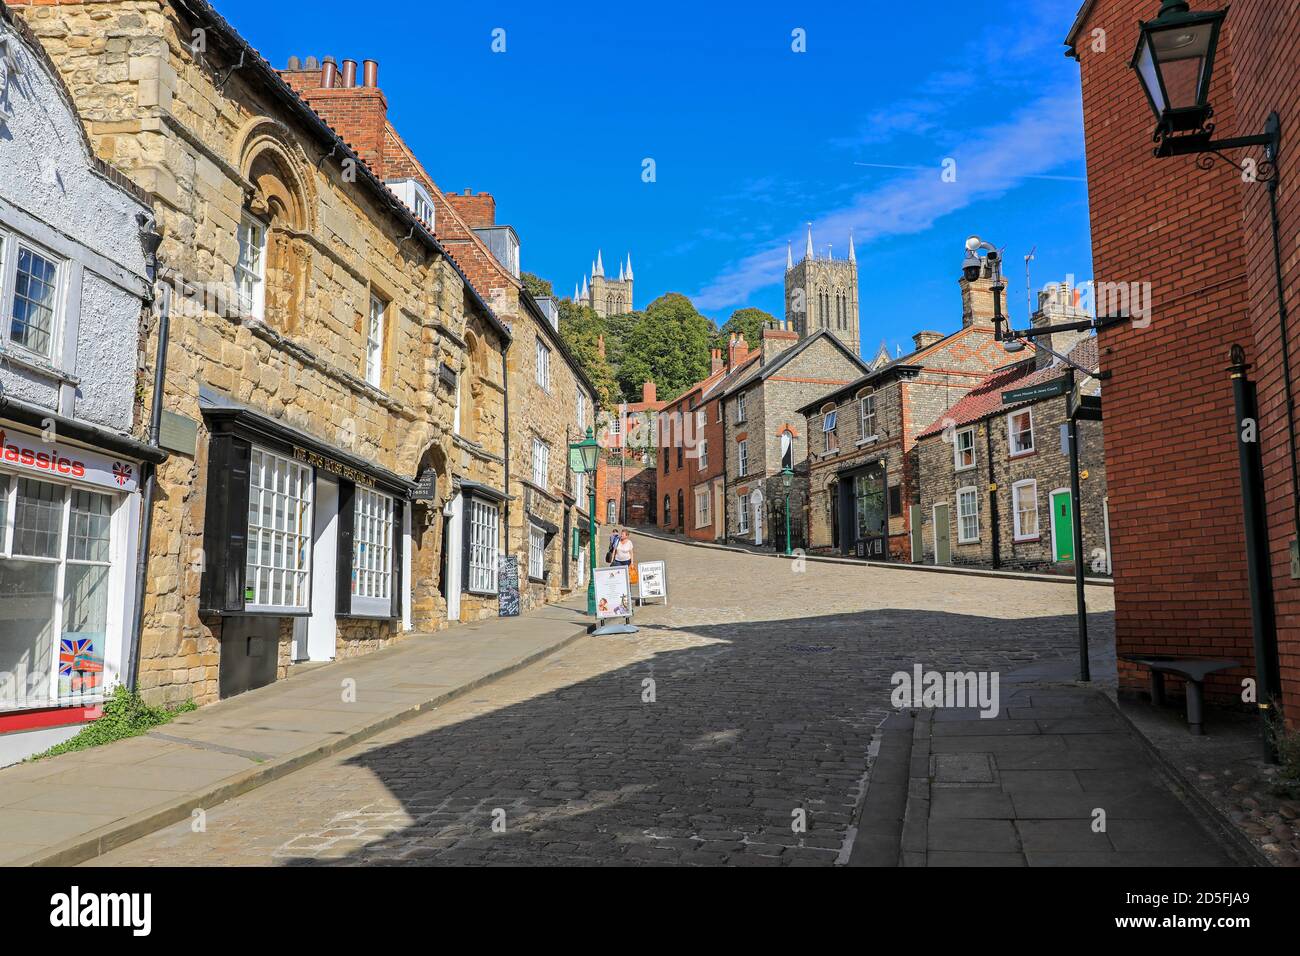 Steep Hill, Blick zurück in Richtung Lincoln Cathedral, City of Lincoln, Lincolnshire, England, Großbritannien Stockfoto